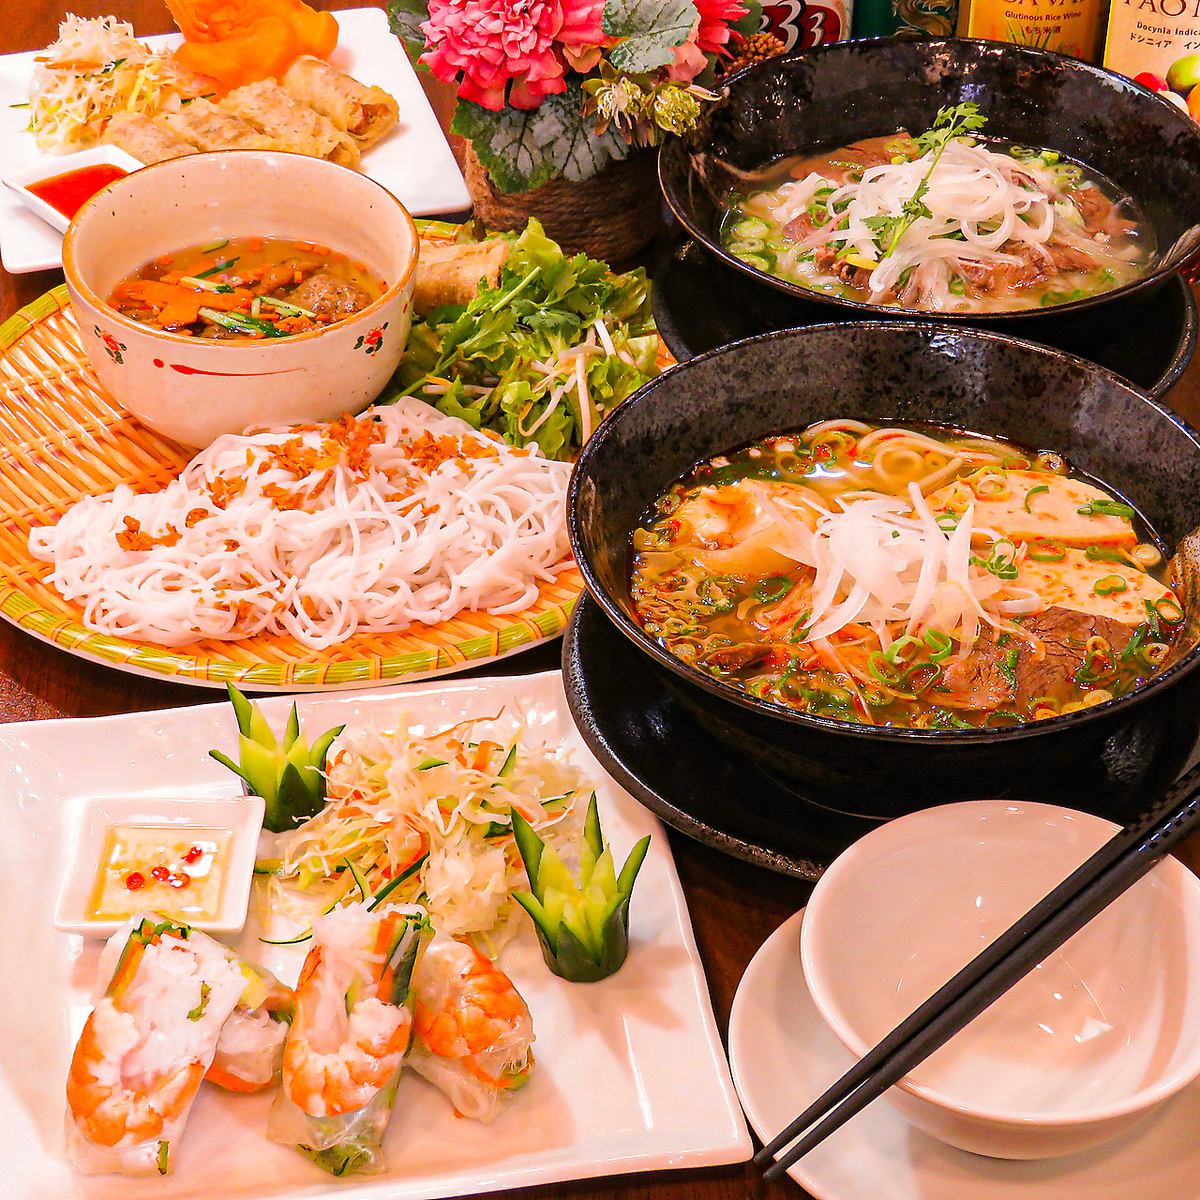 A restaurant specializing in authentic Vietnamese cuisine that stands out in the downtown area. Fully equipped with a luxurious VIP room and karaoke!